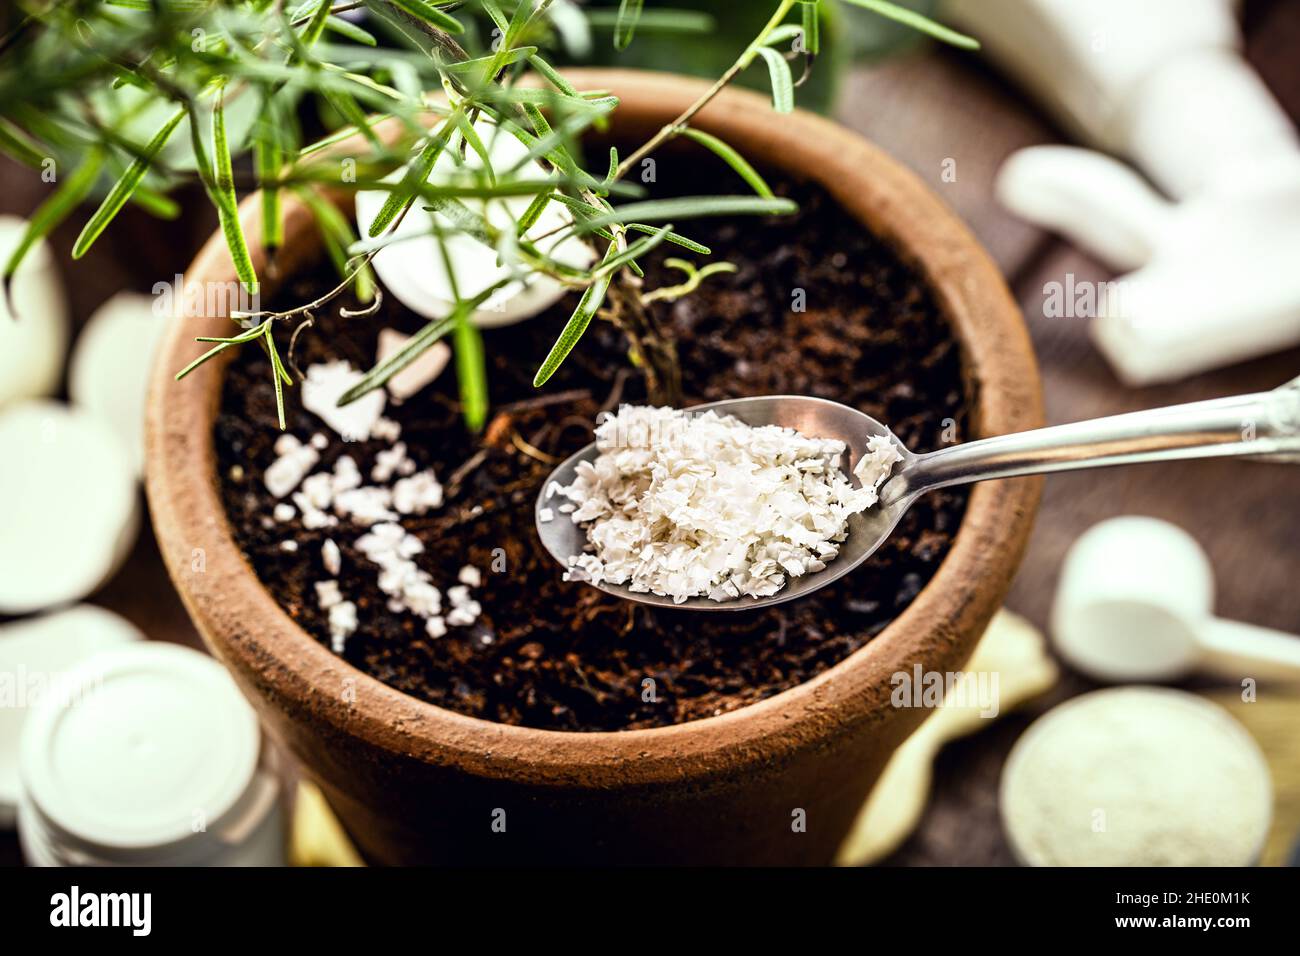 food scraps used as compost, eggshell as plant root vitamin Stock Photo